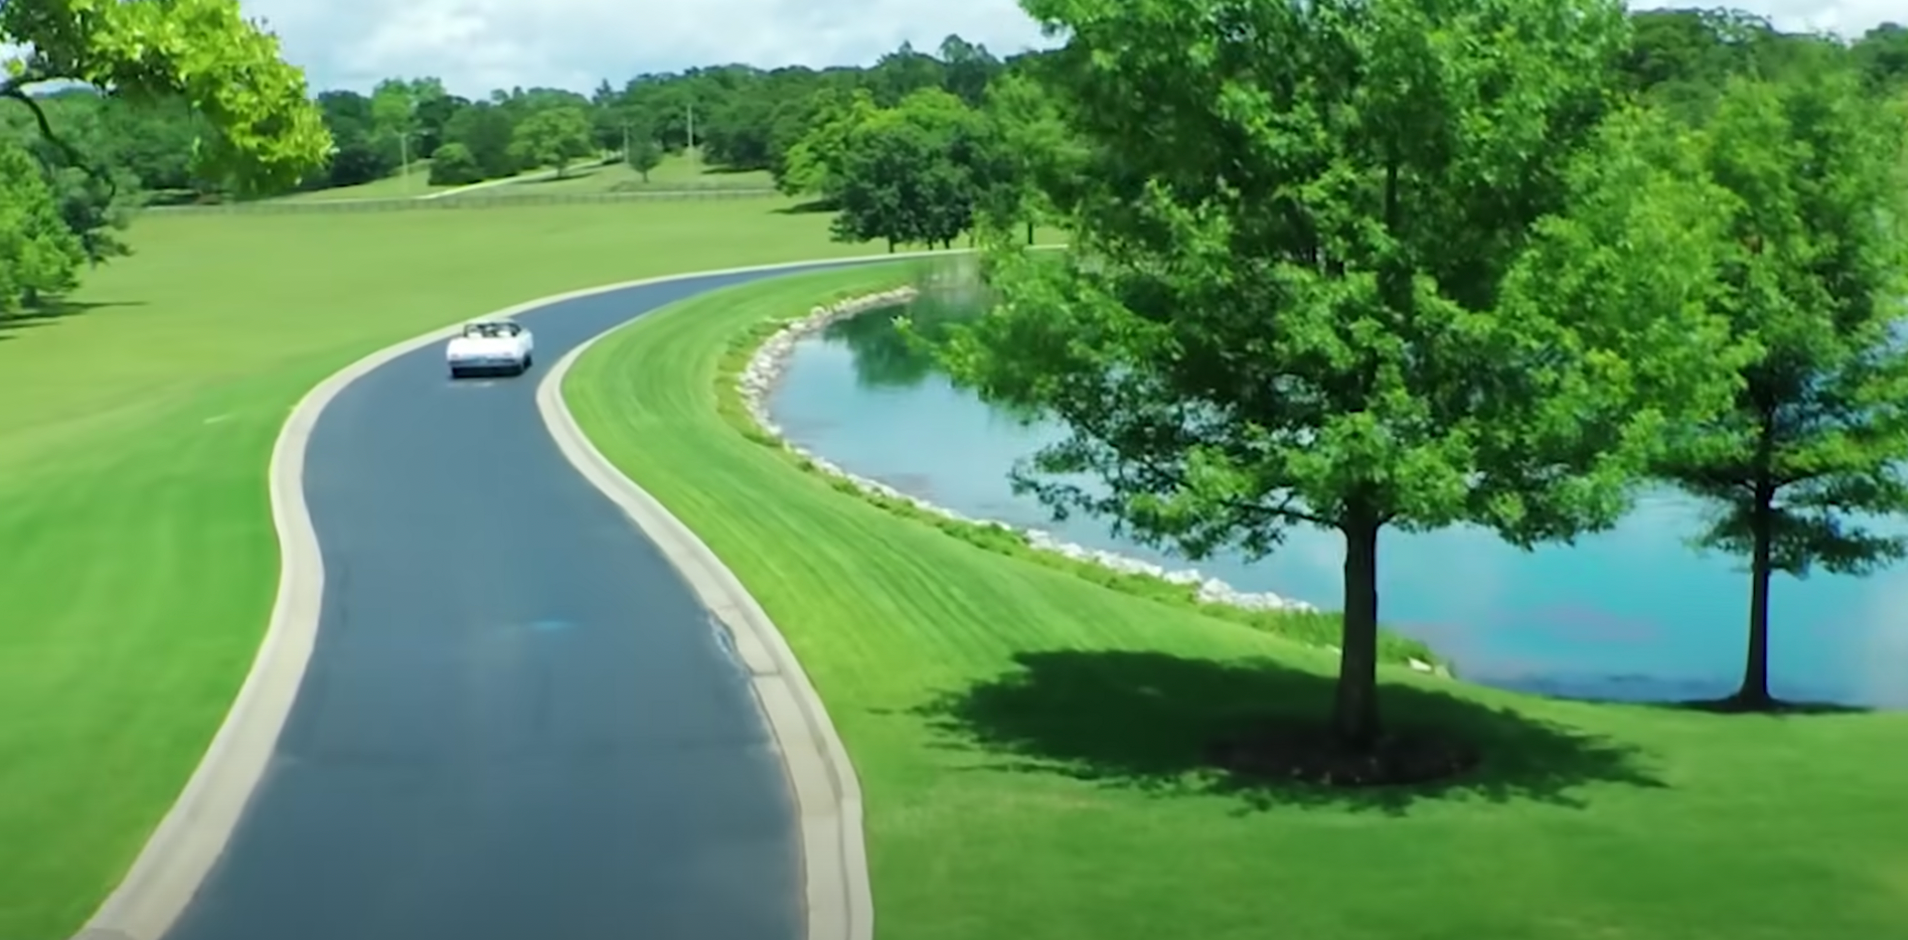 A view of Toby Keith's Oklahoma ranch | Source: YouTube/AXS TV